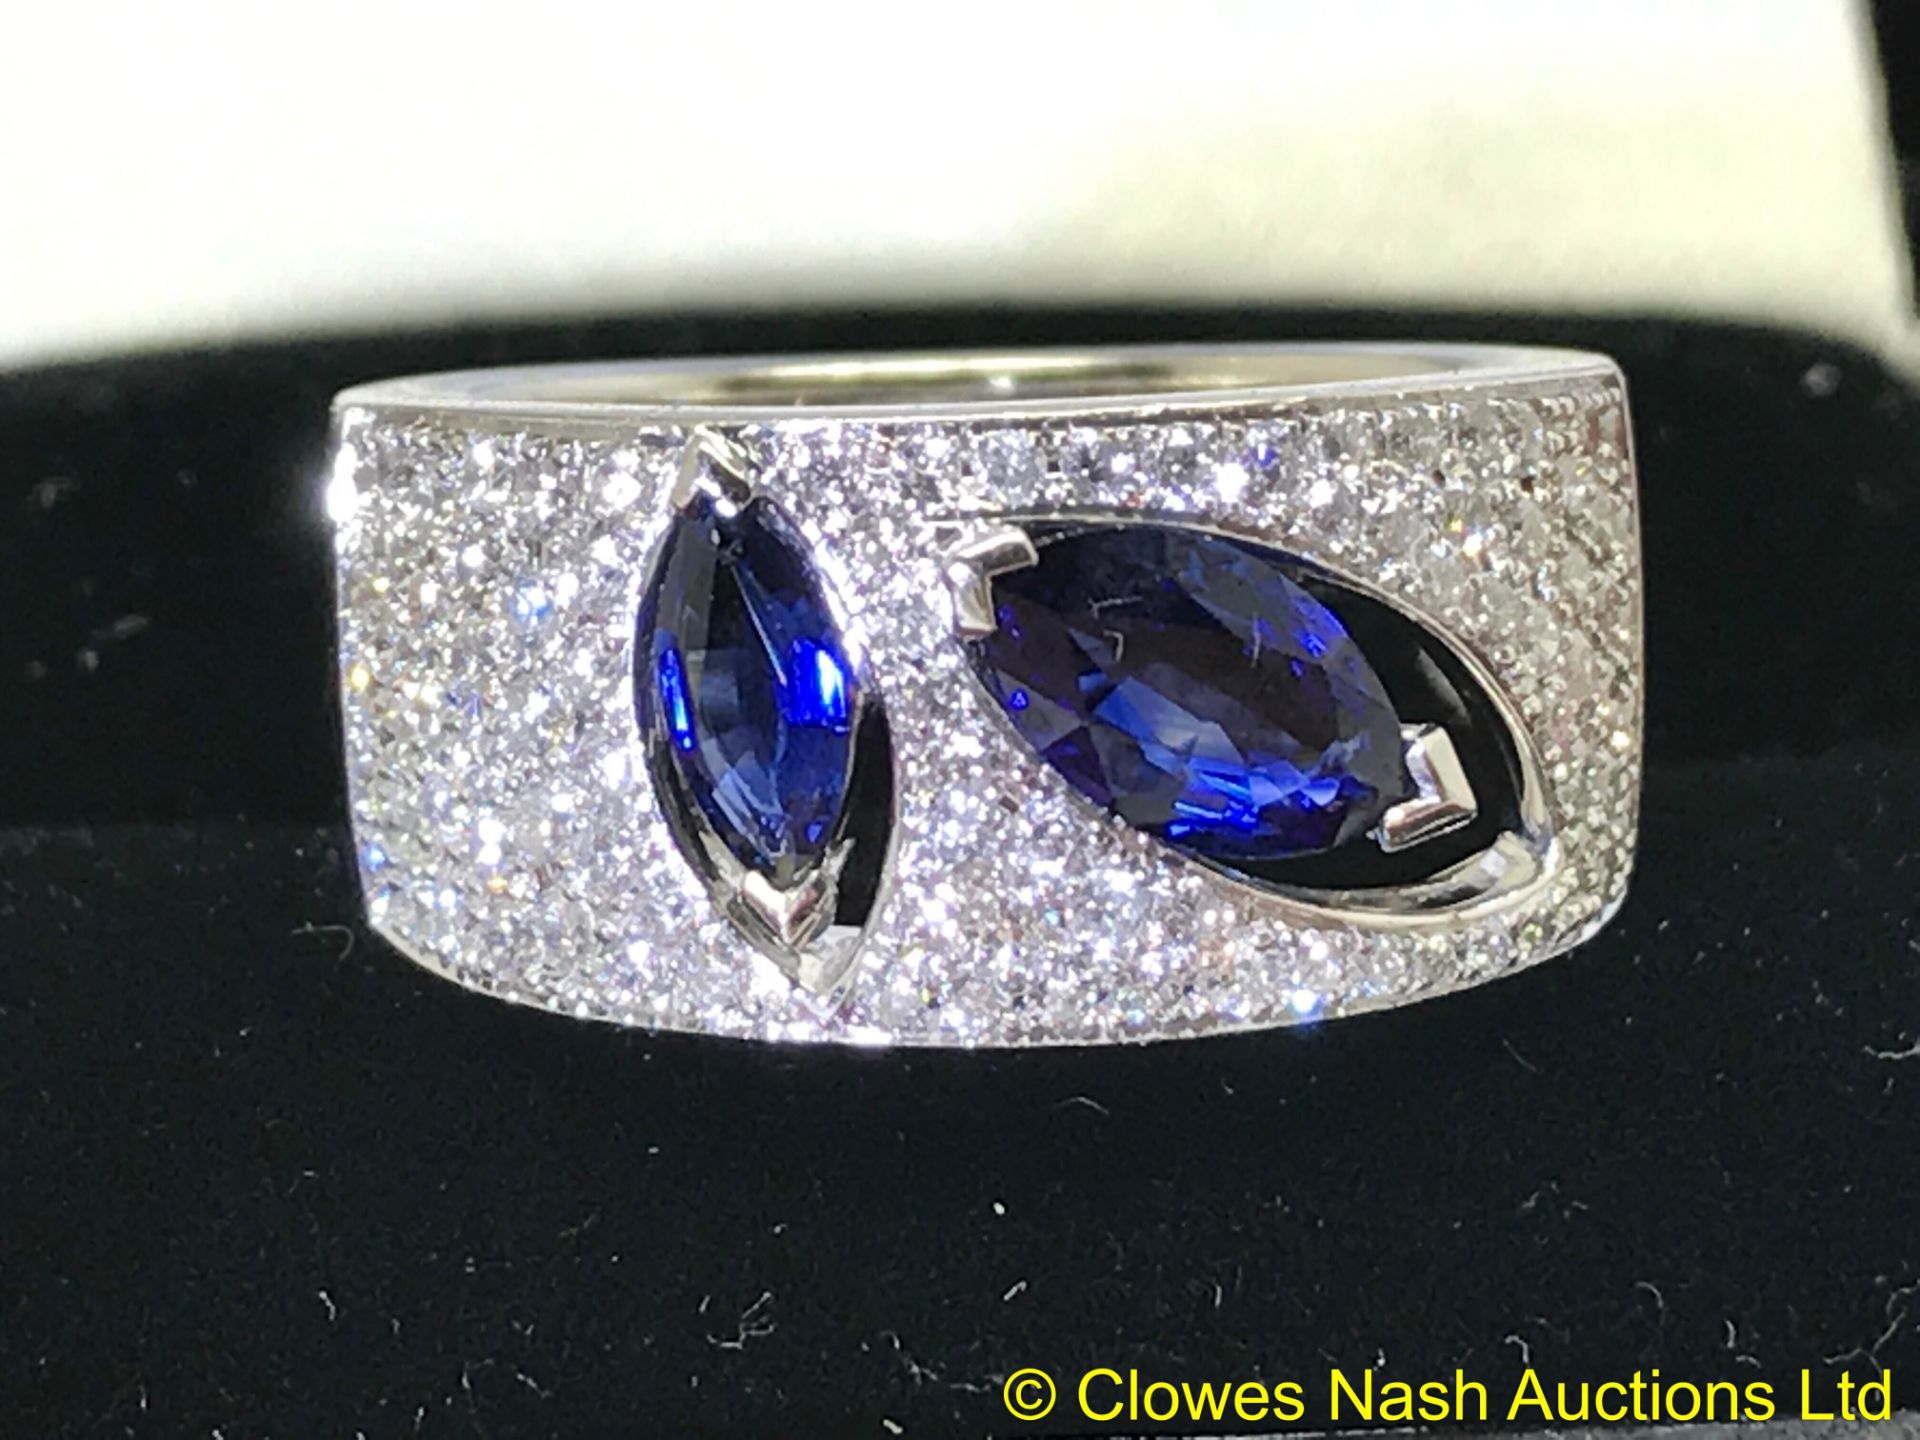 FINE BLUE 1.00ct SAPPHIRE & 1.00ct DIAMOND RING SET IN WHITE METAL MARKED 750 TESTED AS 18ct GOLD - Image 2 of 2